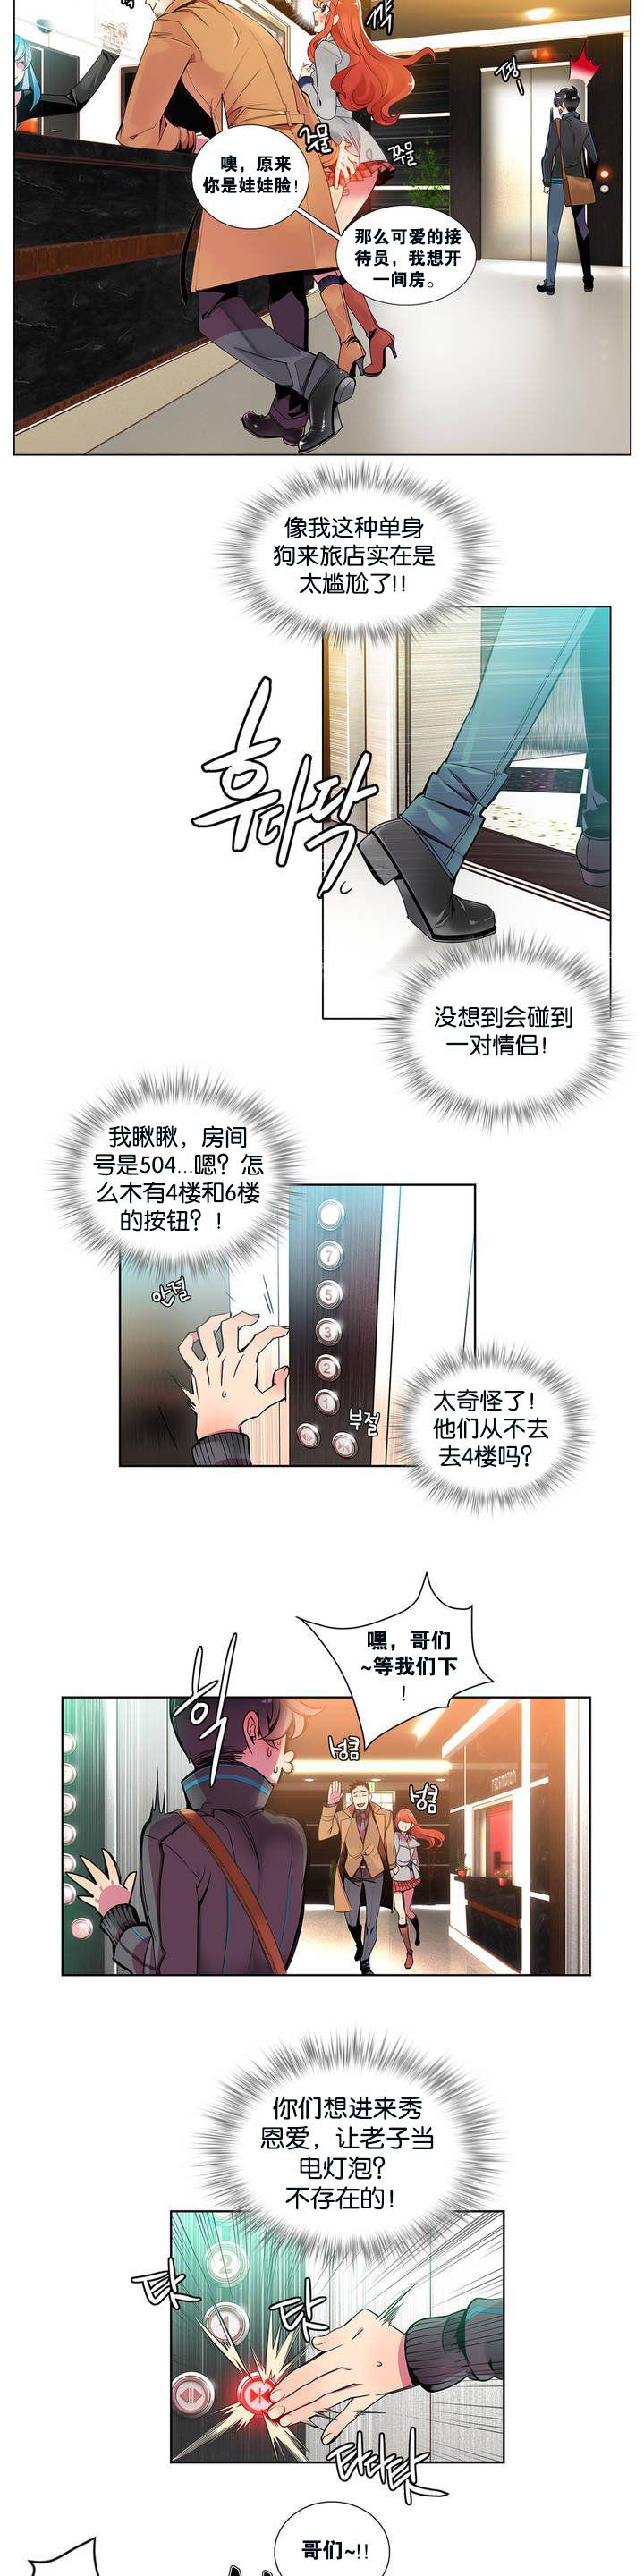 Gemendo [Juder] 莉莉丝的脐带(Lilith`s Cord) Ch.1-24 [Chinese] Selfie - Page 8